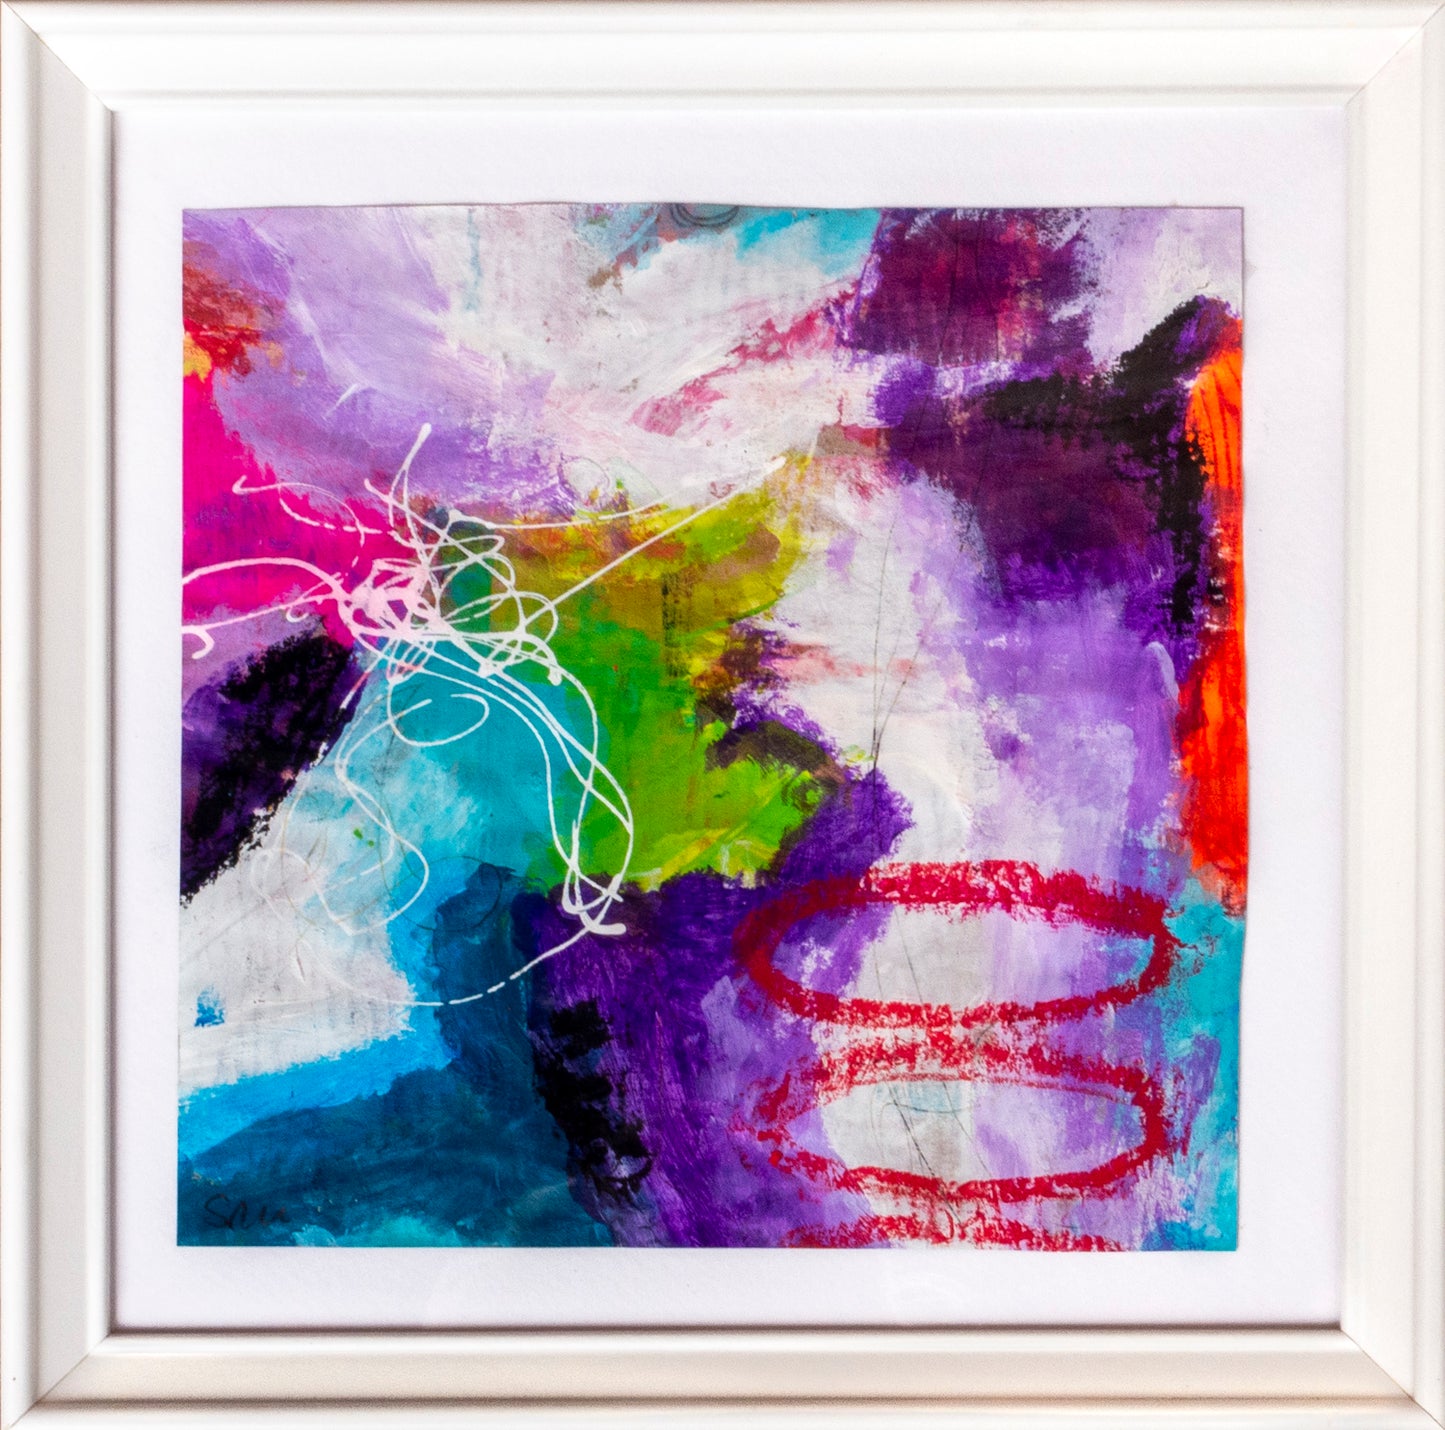 Colorful acrylic abstract painting on paper titled 'Part of the Whole #11' by artist Steffi Möllers; measures app 7.5"x7.5"; w/frame measures app 10"x10"